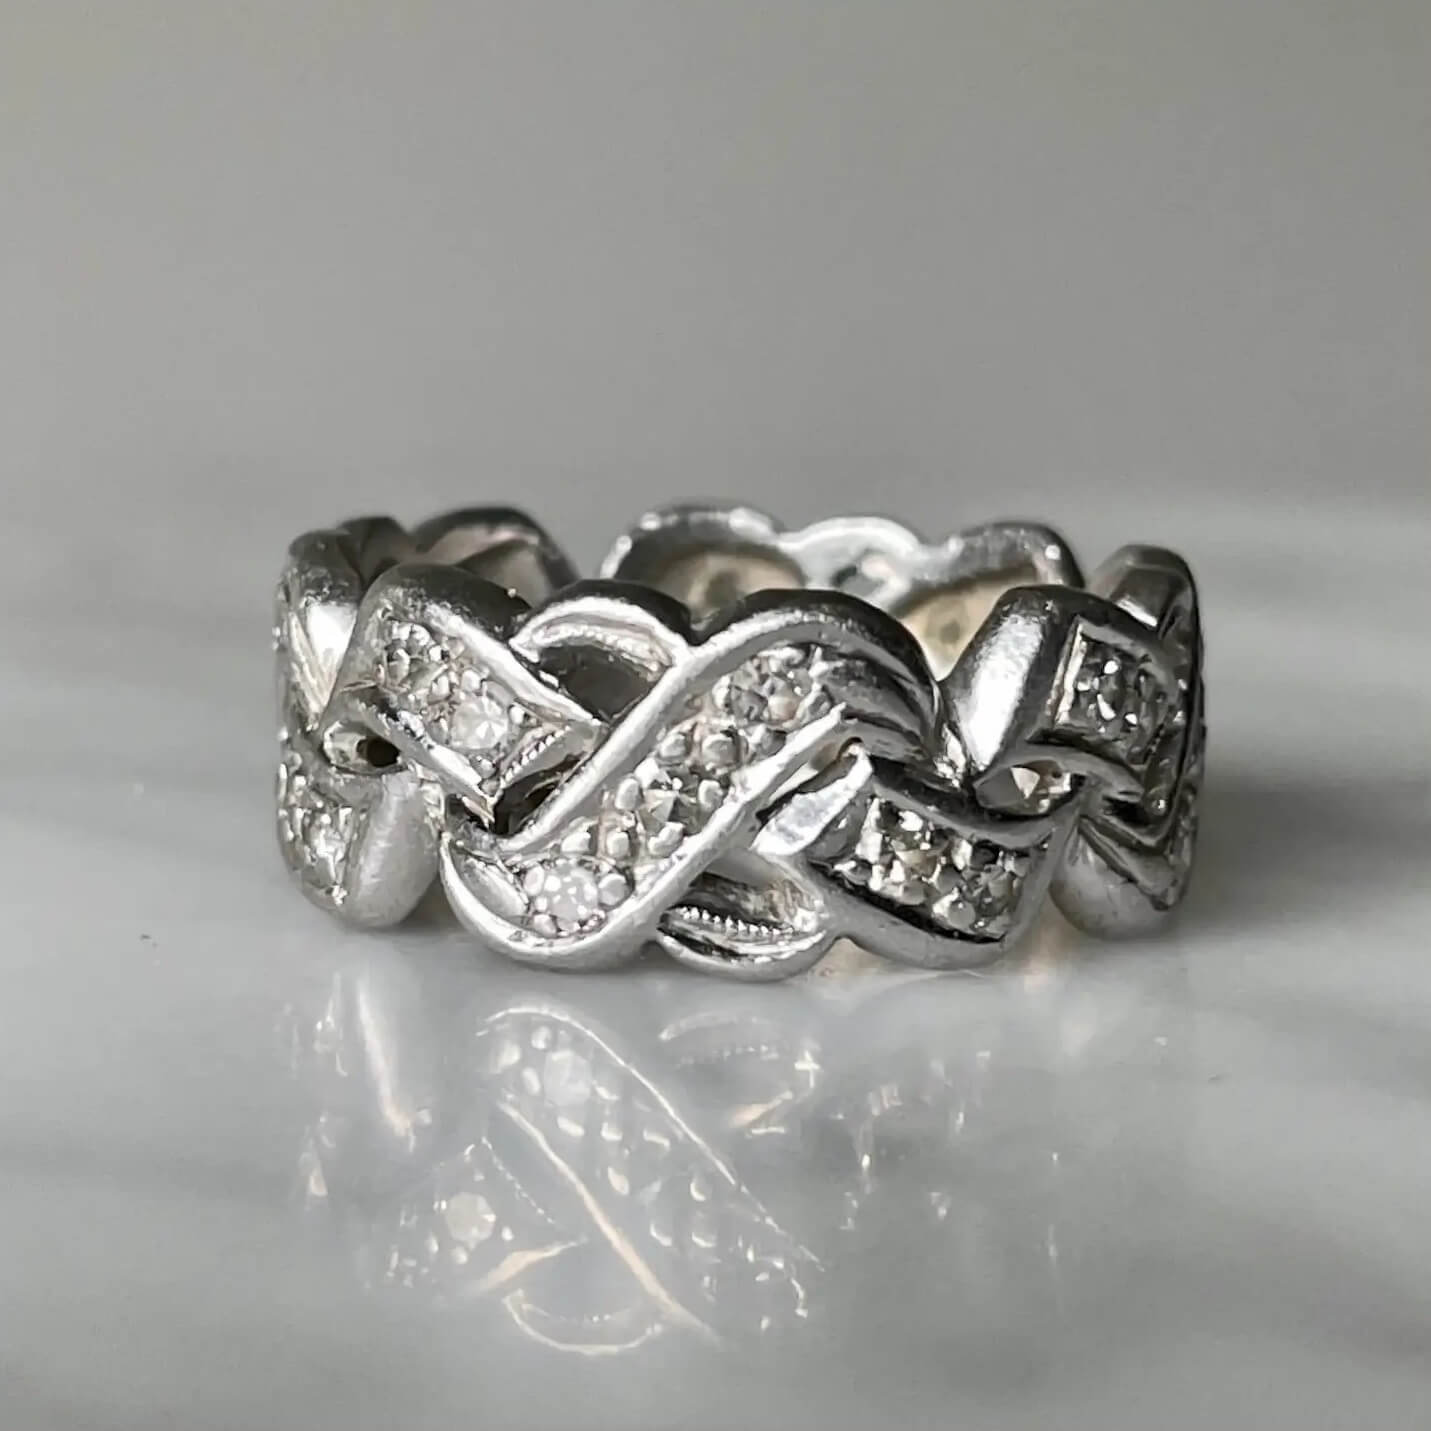 Wide Vintage 18K White Gold Diamond Eternity Braided Intertwined